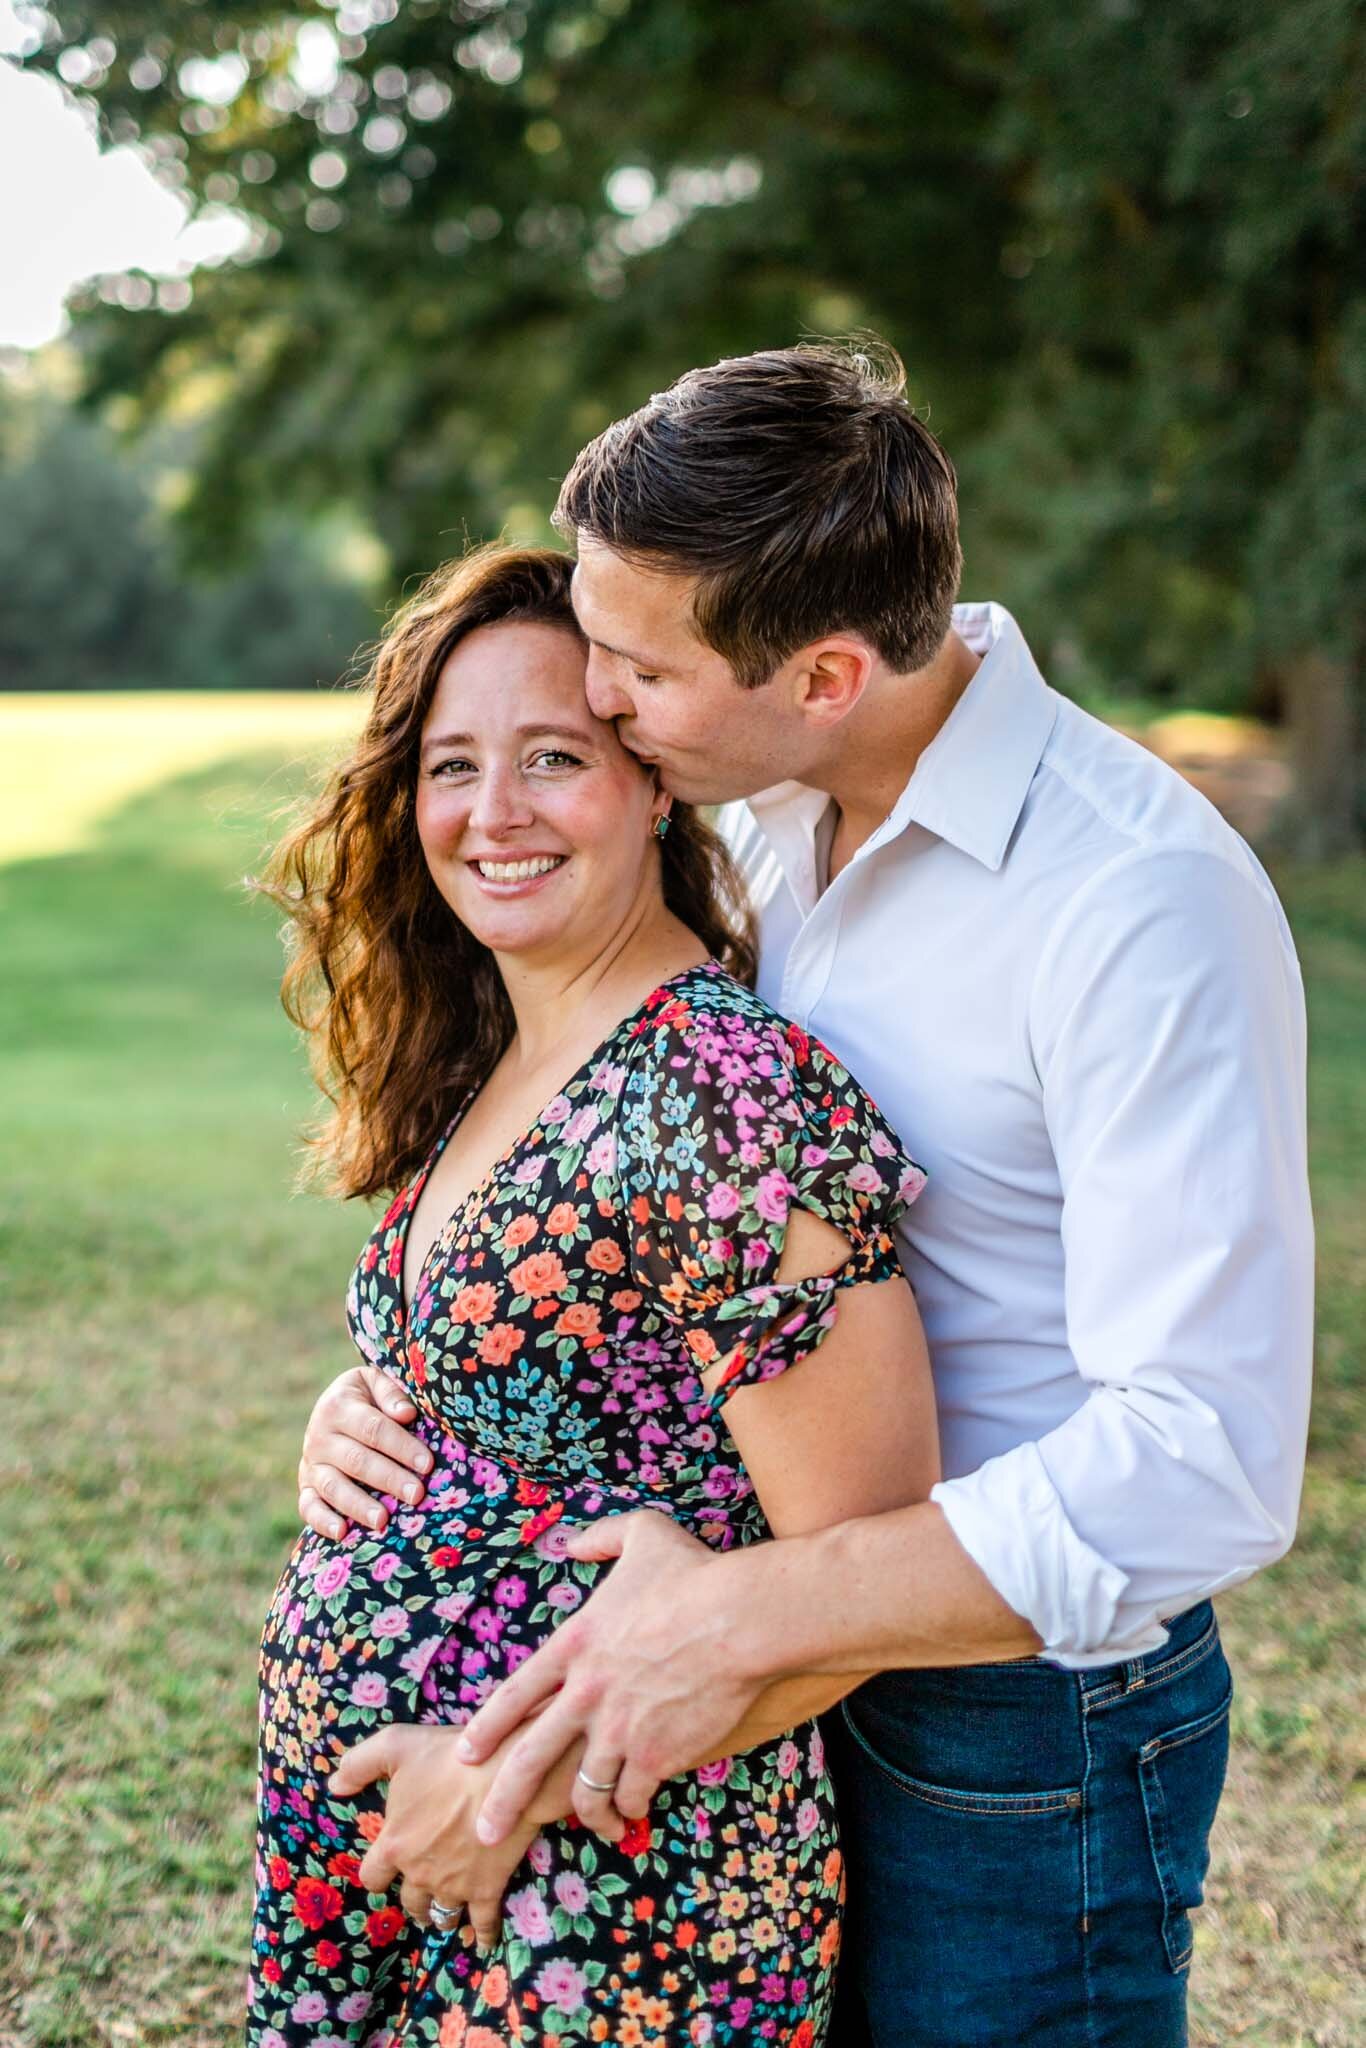 Raleigh Maternity Photographer | Dix Park | By G. Lin Photography | Man embracing woman and giving her a kiss on the cheek